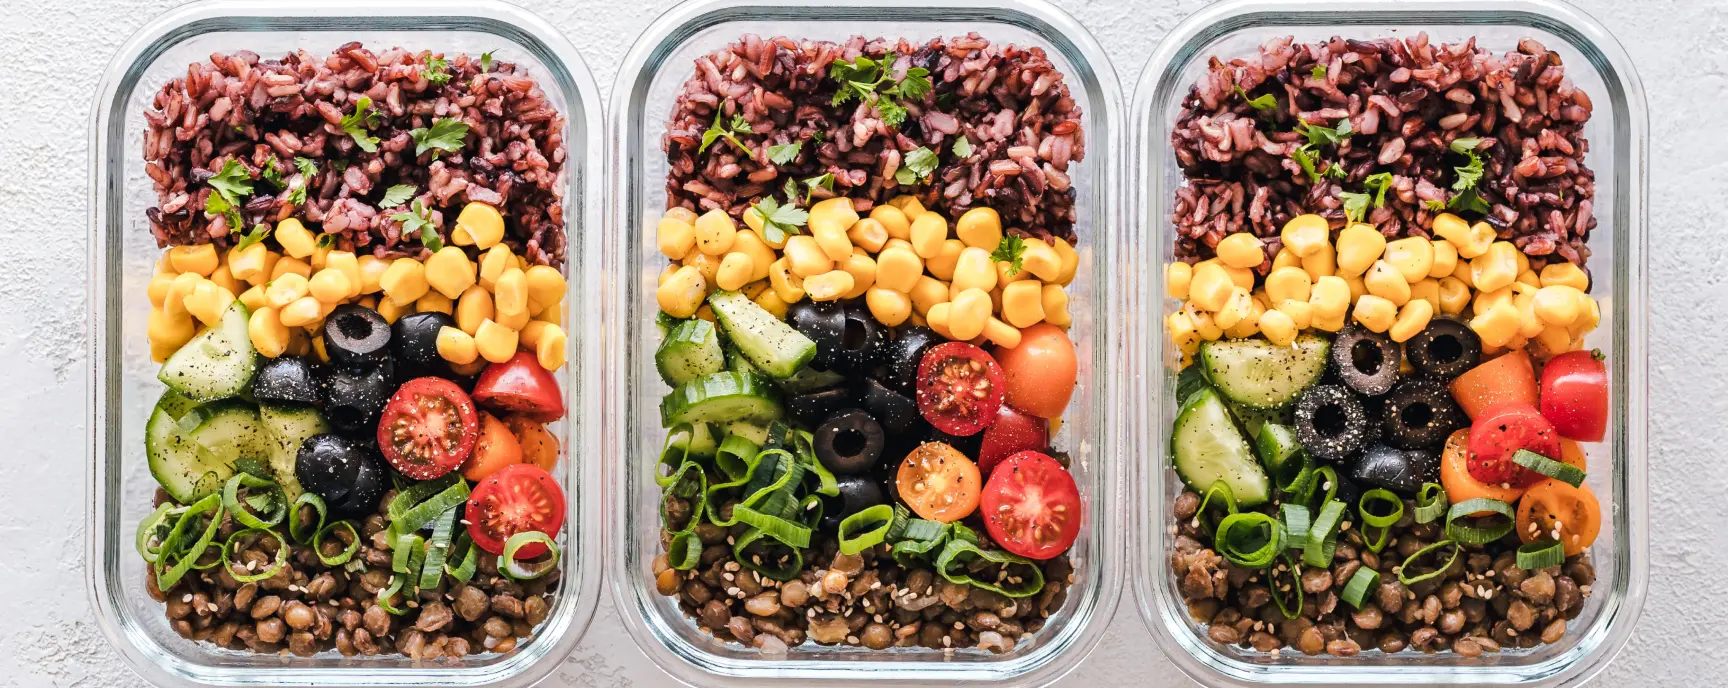 3 trays with a colourfull meal including tomato, lentils, corn, rice and some veggies